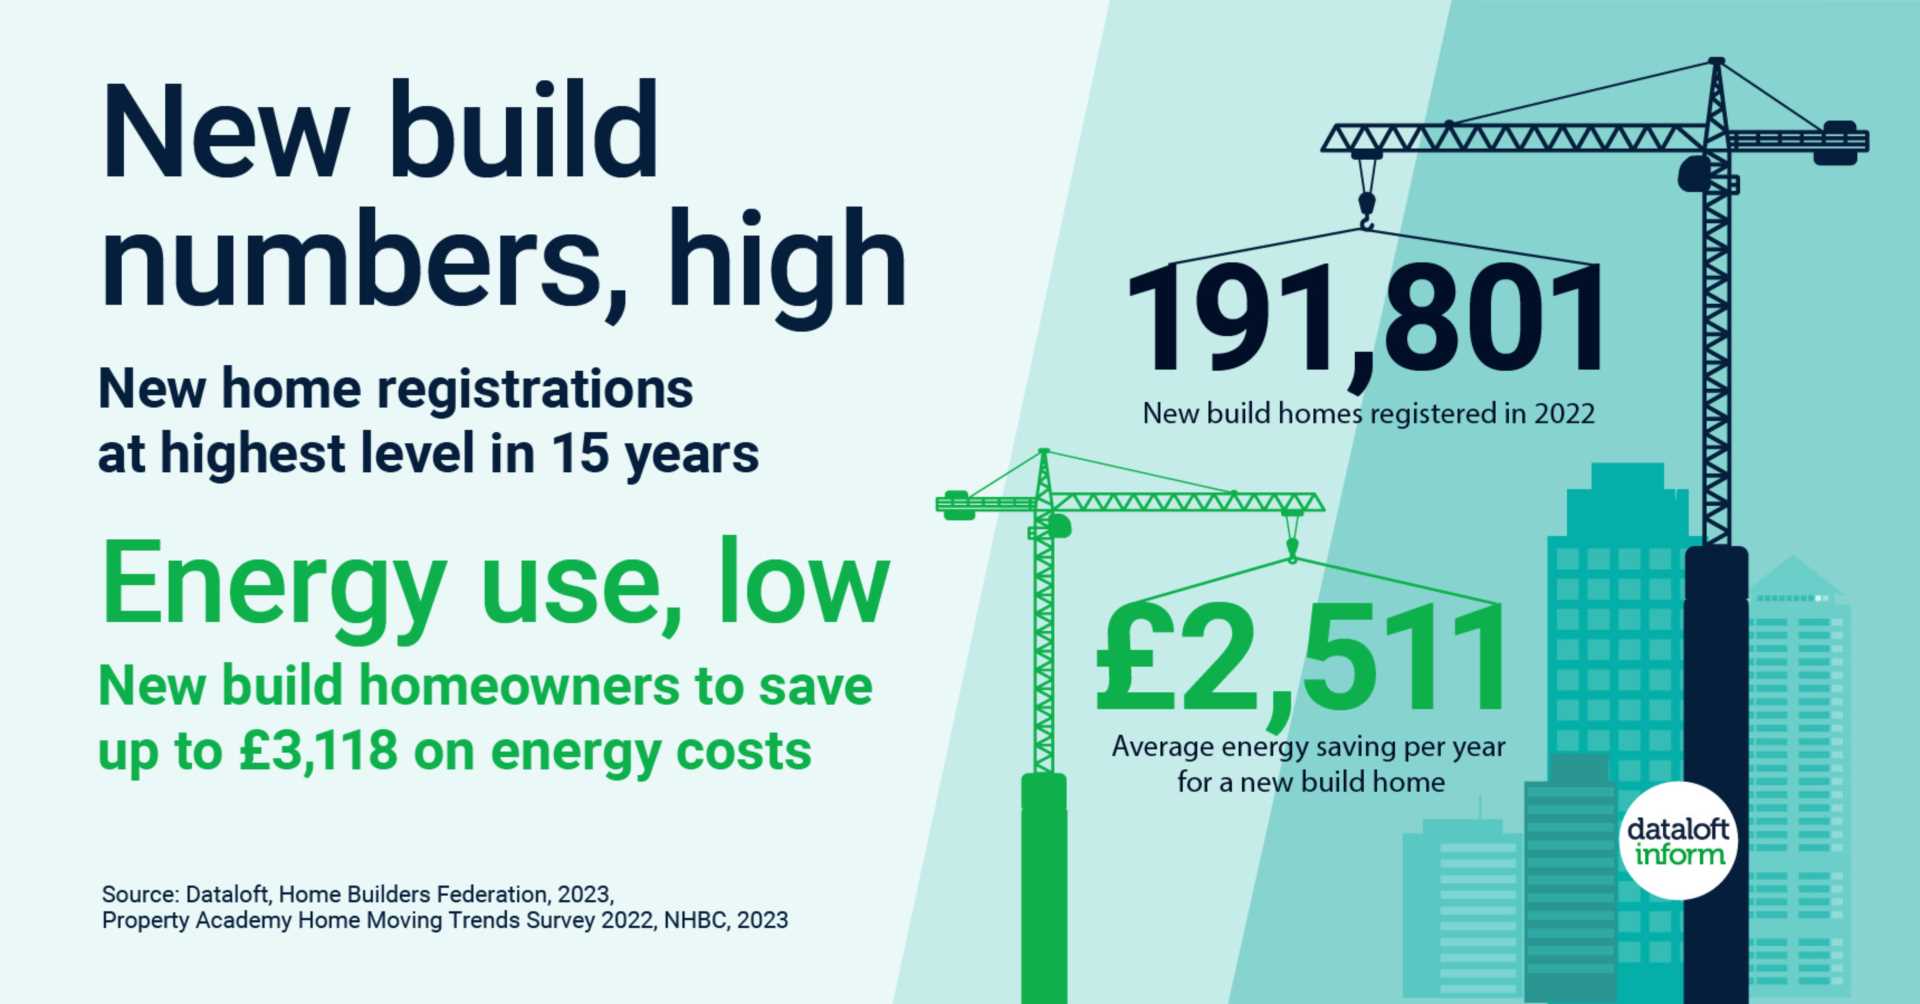 New build number high, new build energy use low